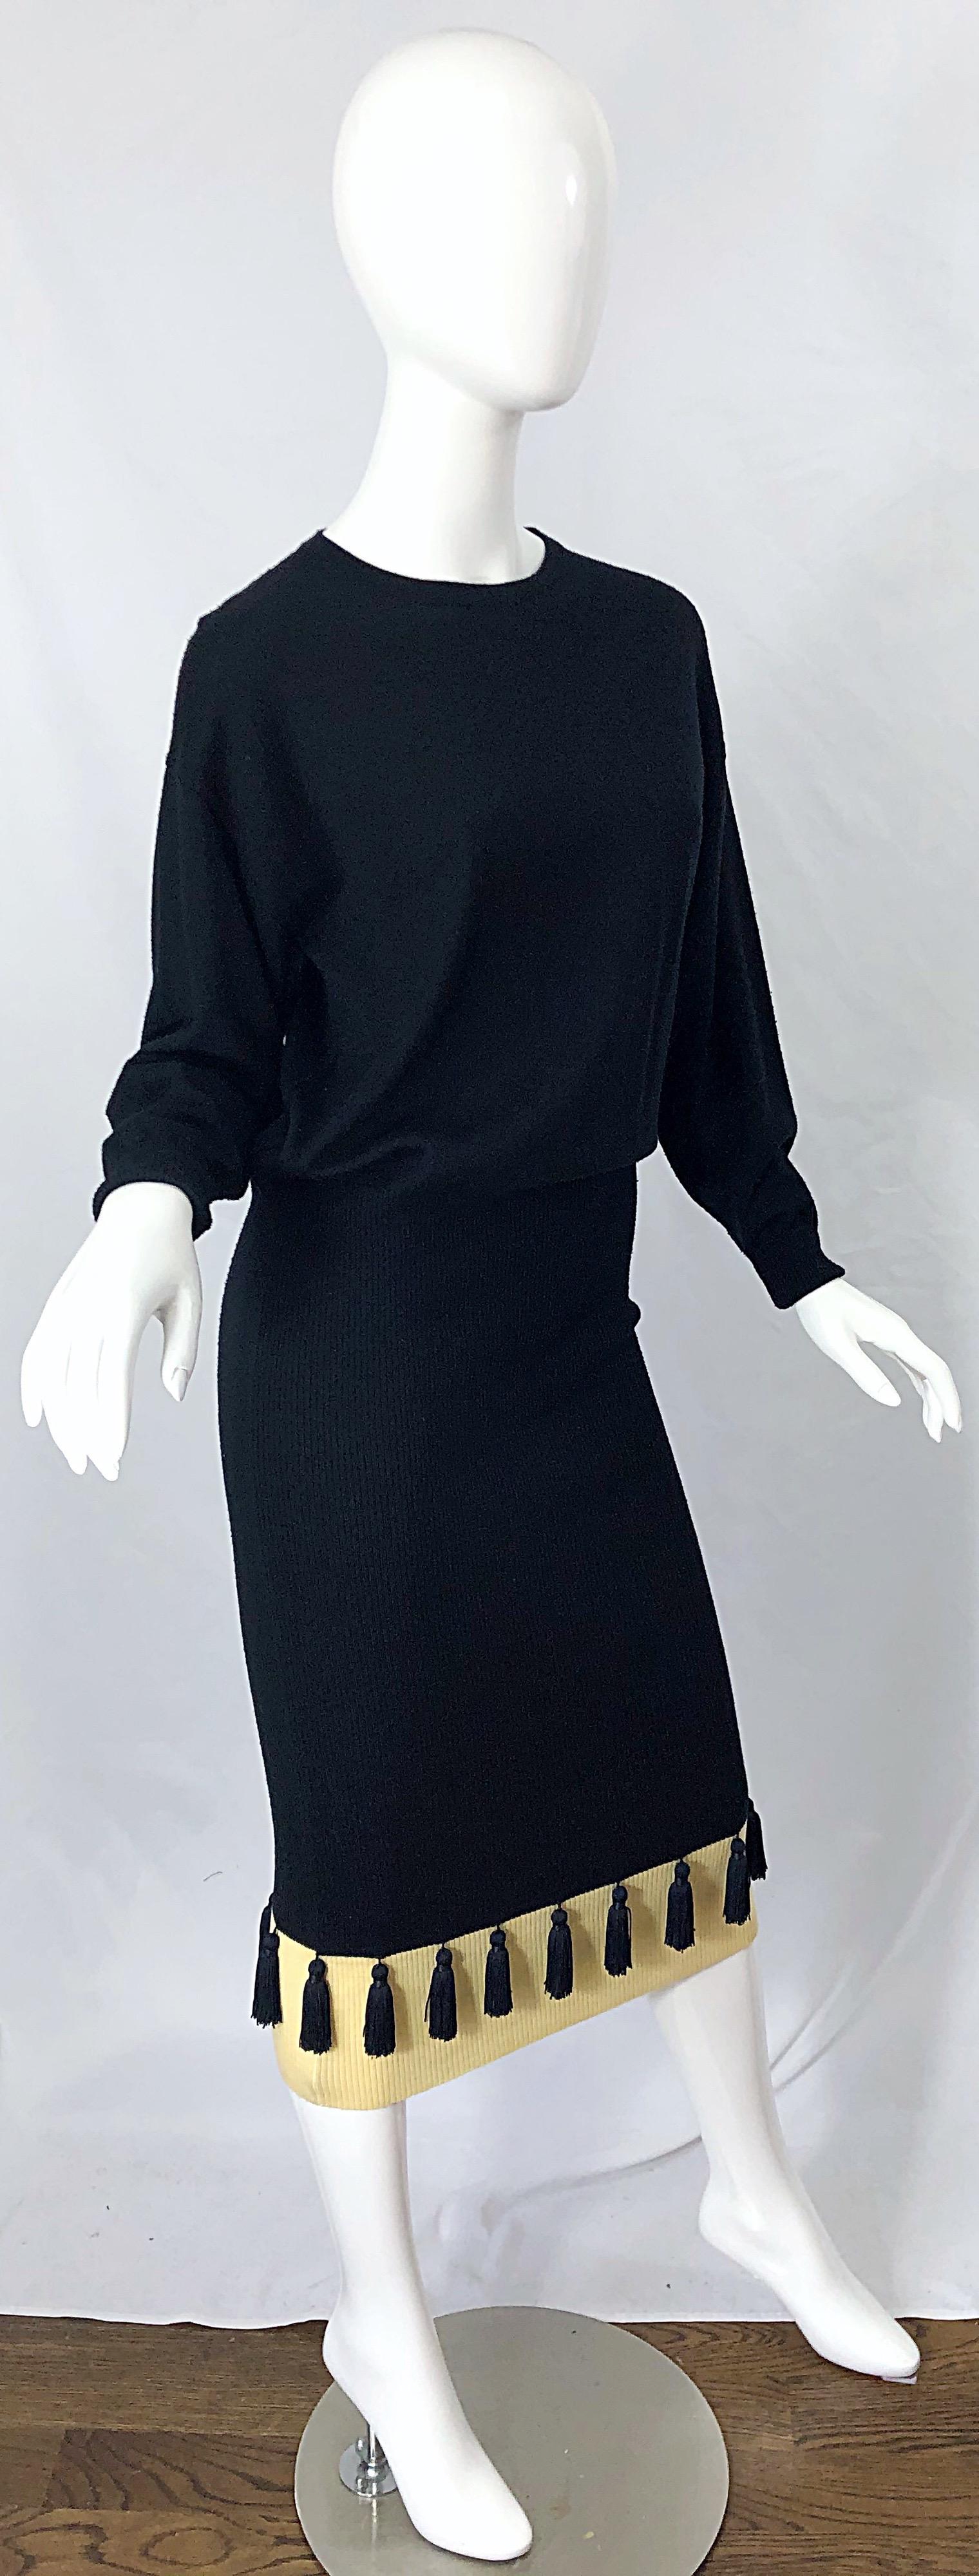 1980s Angelo Tarlazzi Black and Ivory Wool Dolman Sleeve 80s Sweater Dress For Sale 7